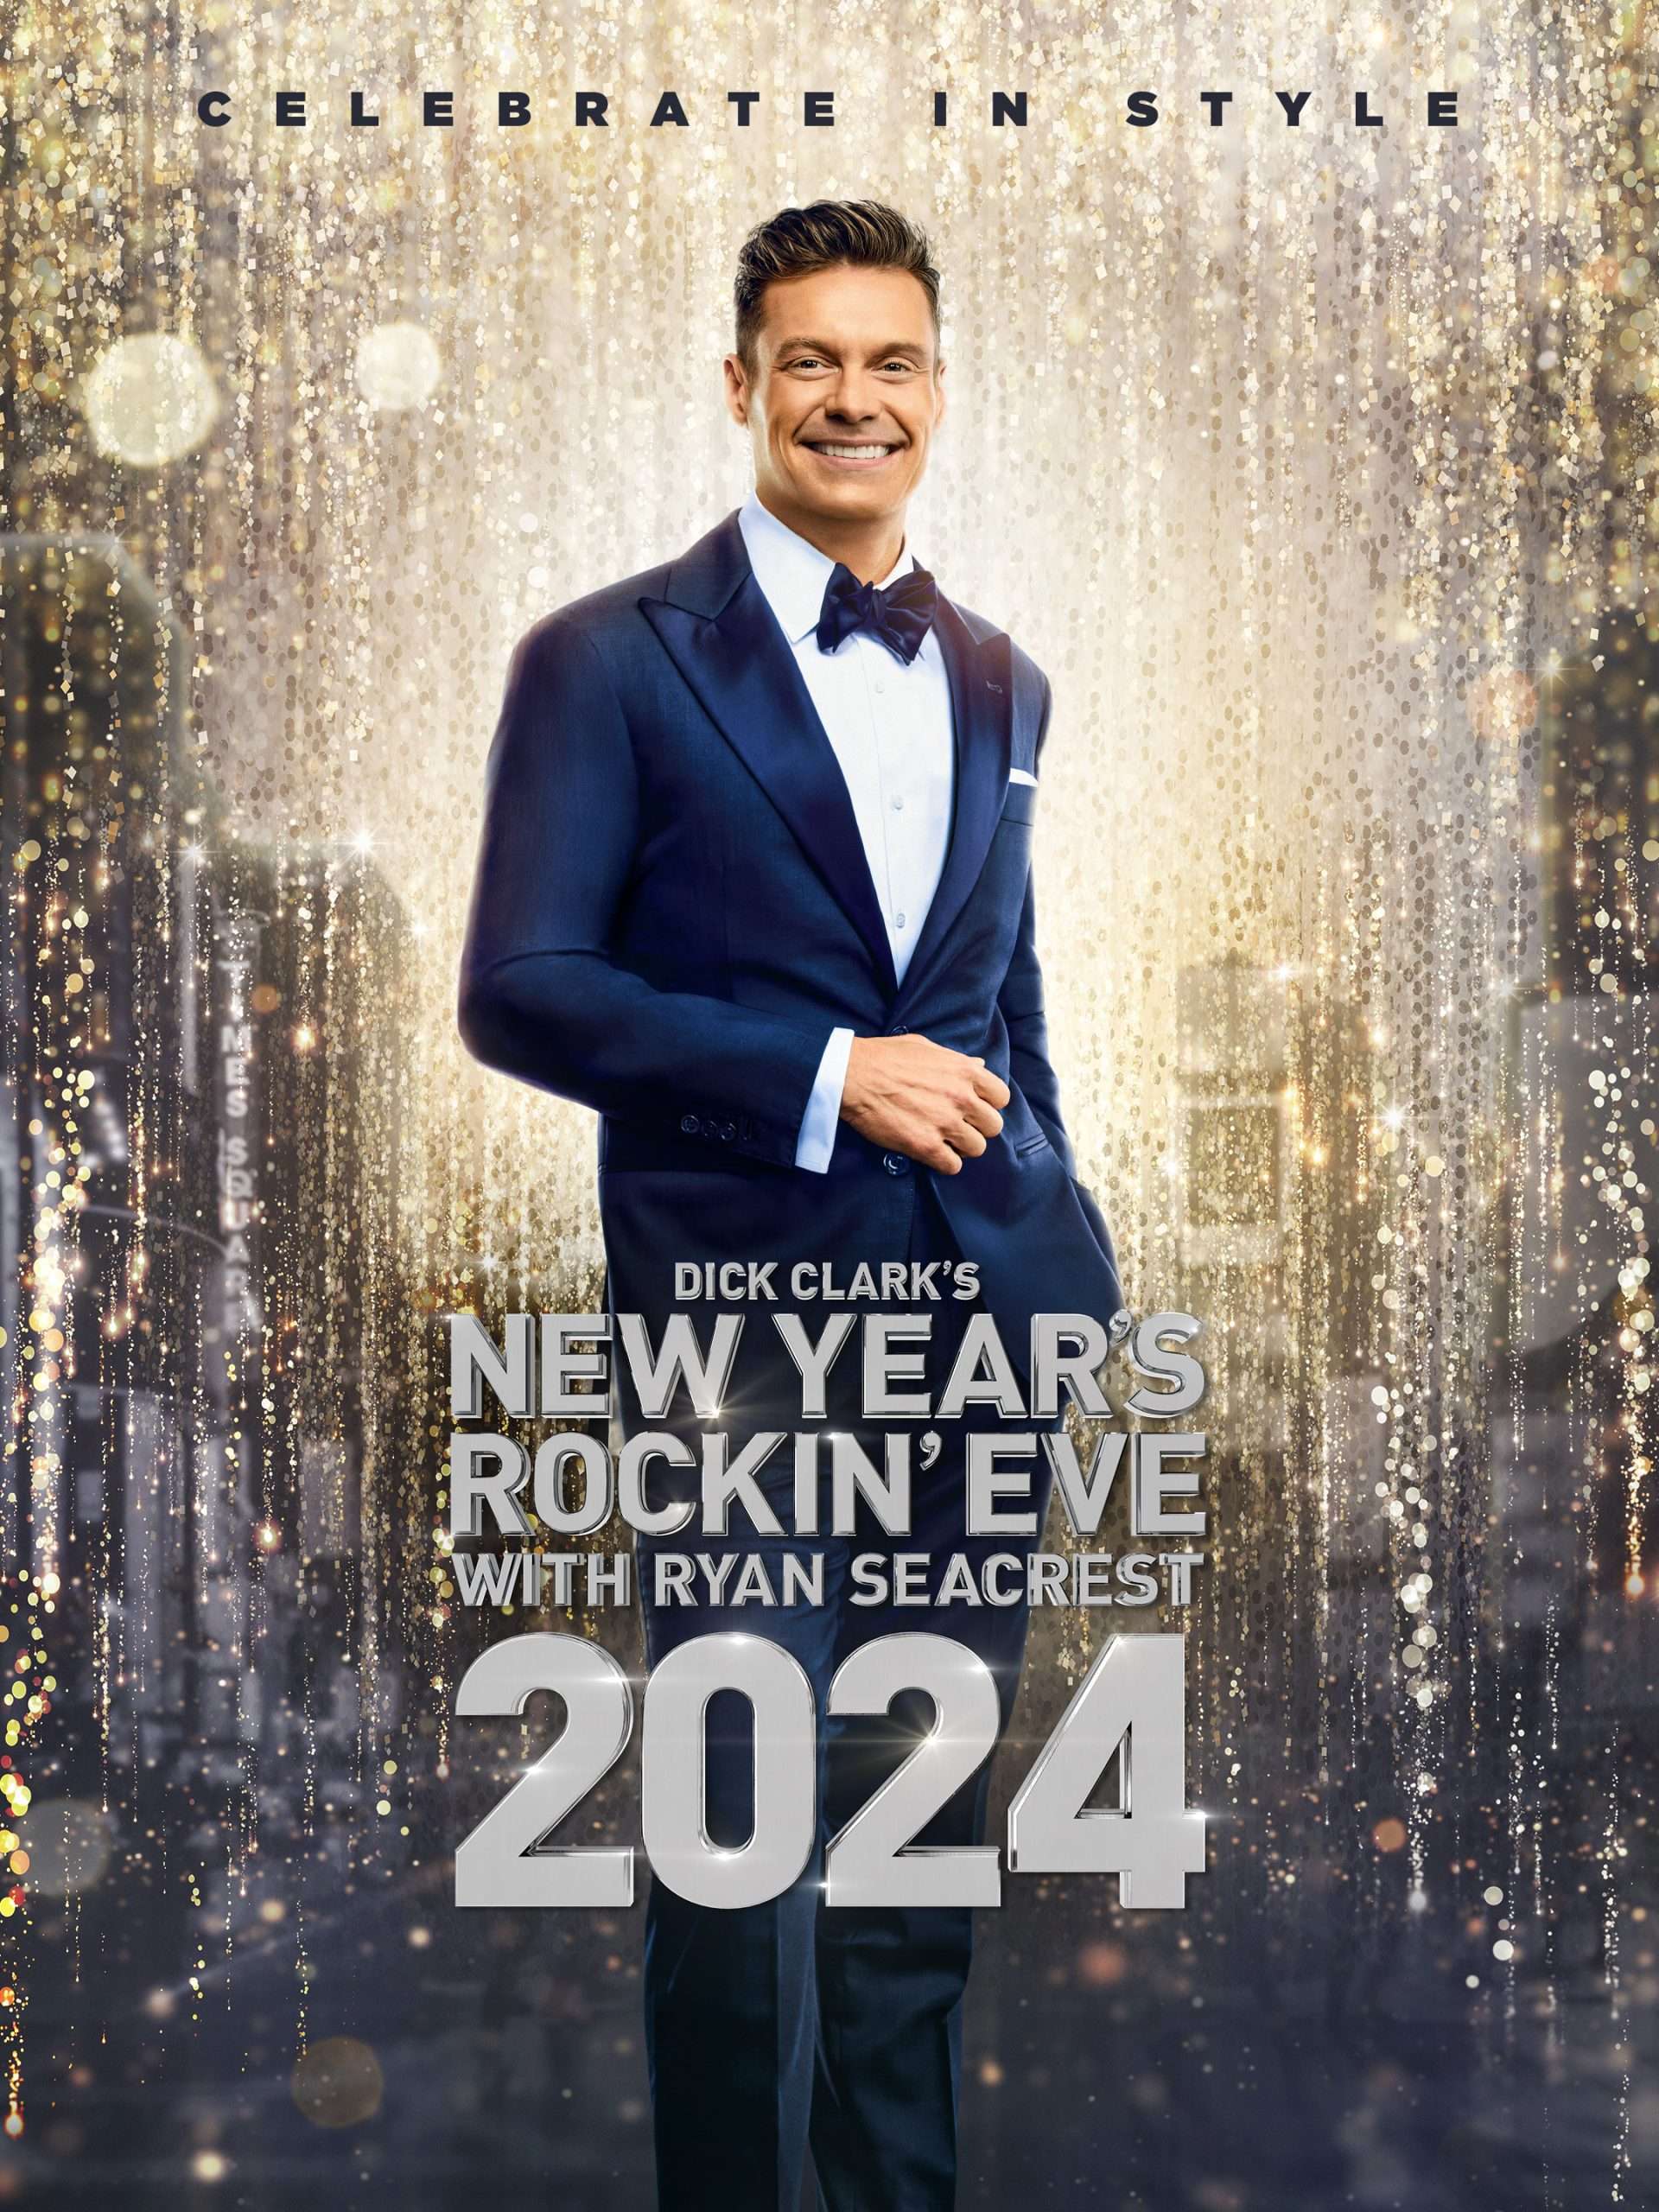 Dick Clark's New Year's Rockin' Eve With Ryan Seacrest 2024 "Part 2